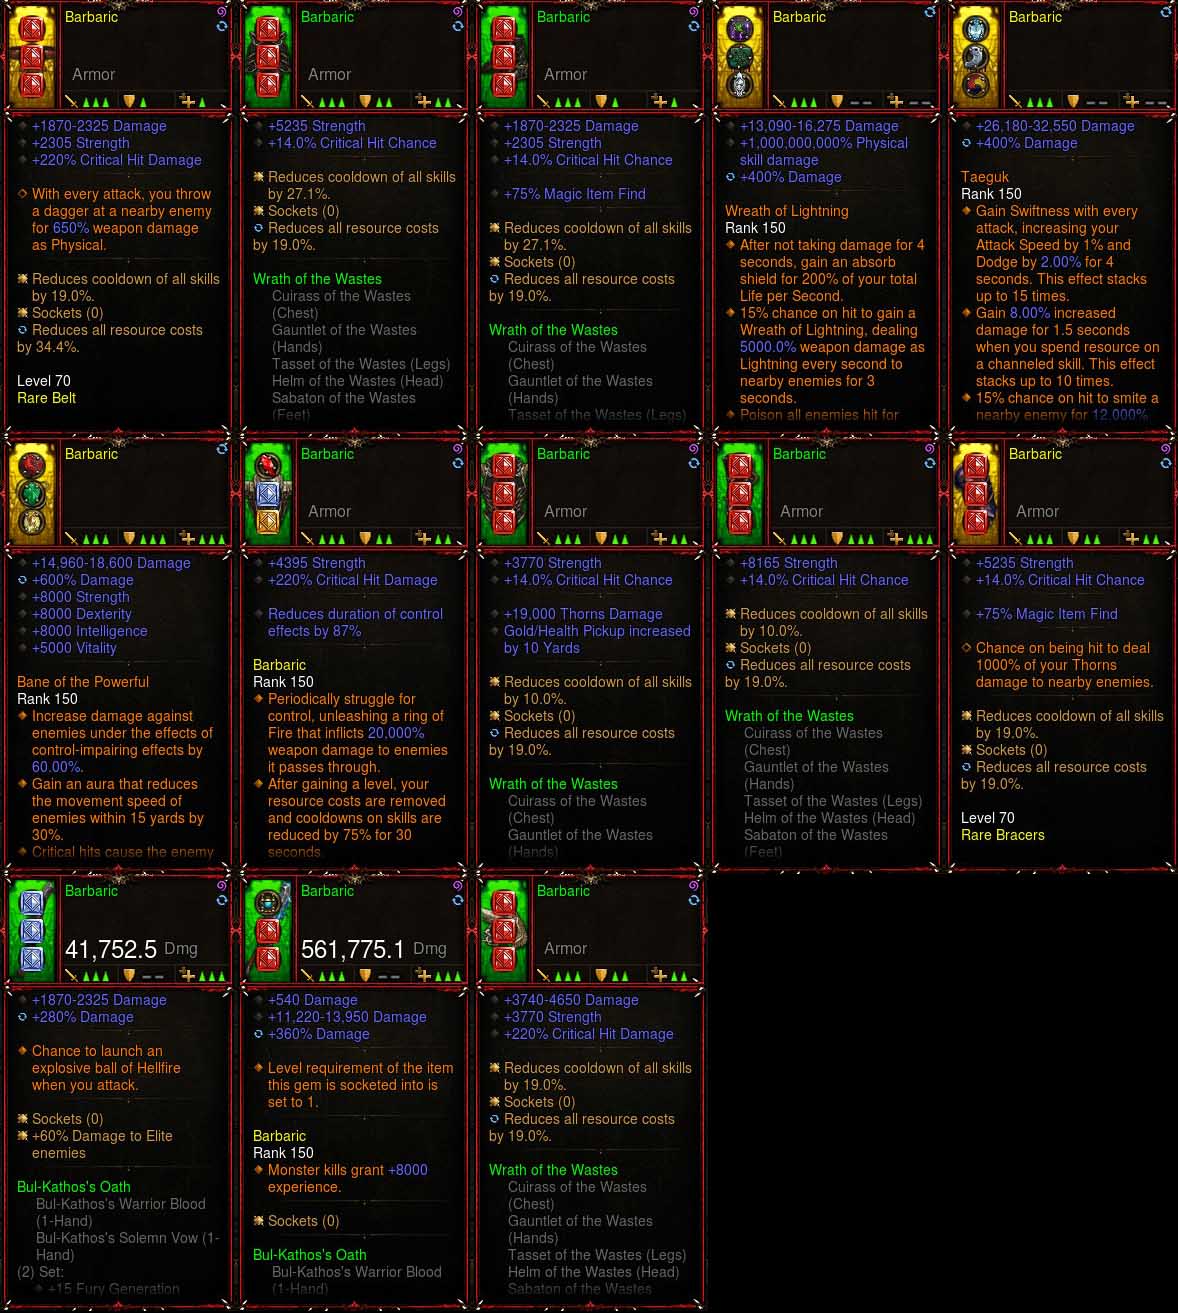 [Primal Ancient] [Quad DPS] [LIMITED] Diablo 3 IMv5 Waste Barbarian Set Barbaric W1 Diablo 3 Mods ROS Seasonal and Non Seasonal Save Mod - Modded Items and Gear - Hacks - Cheats - Trainers for Playstation 4 - Playstation 5 - Nintendo Switch - Xbox One